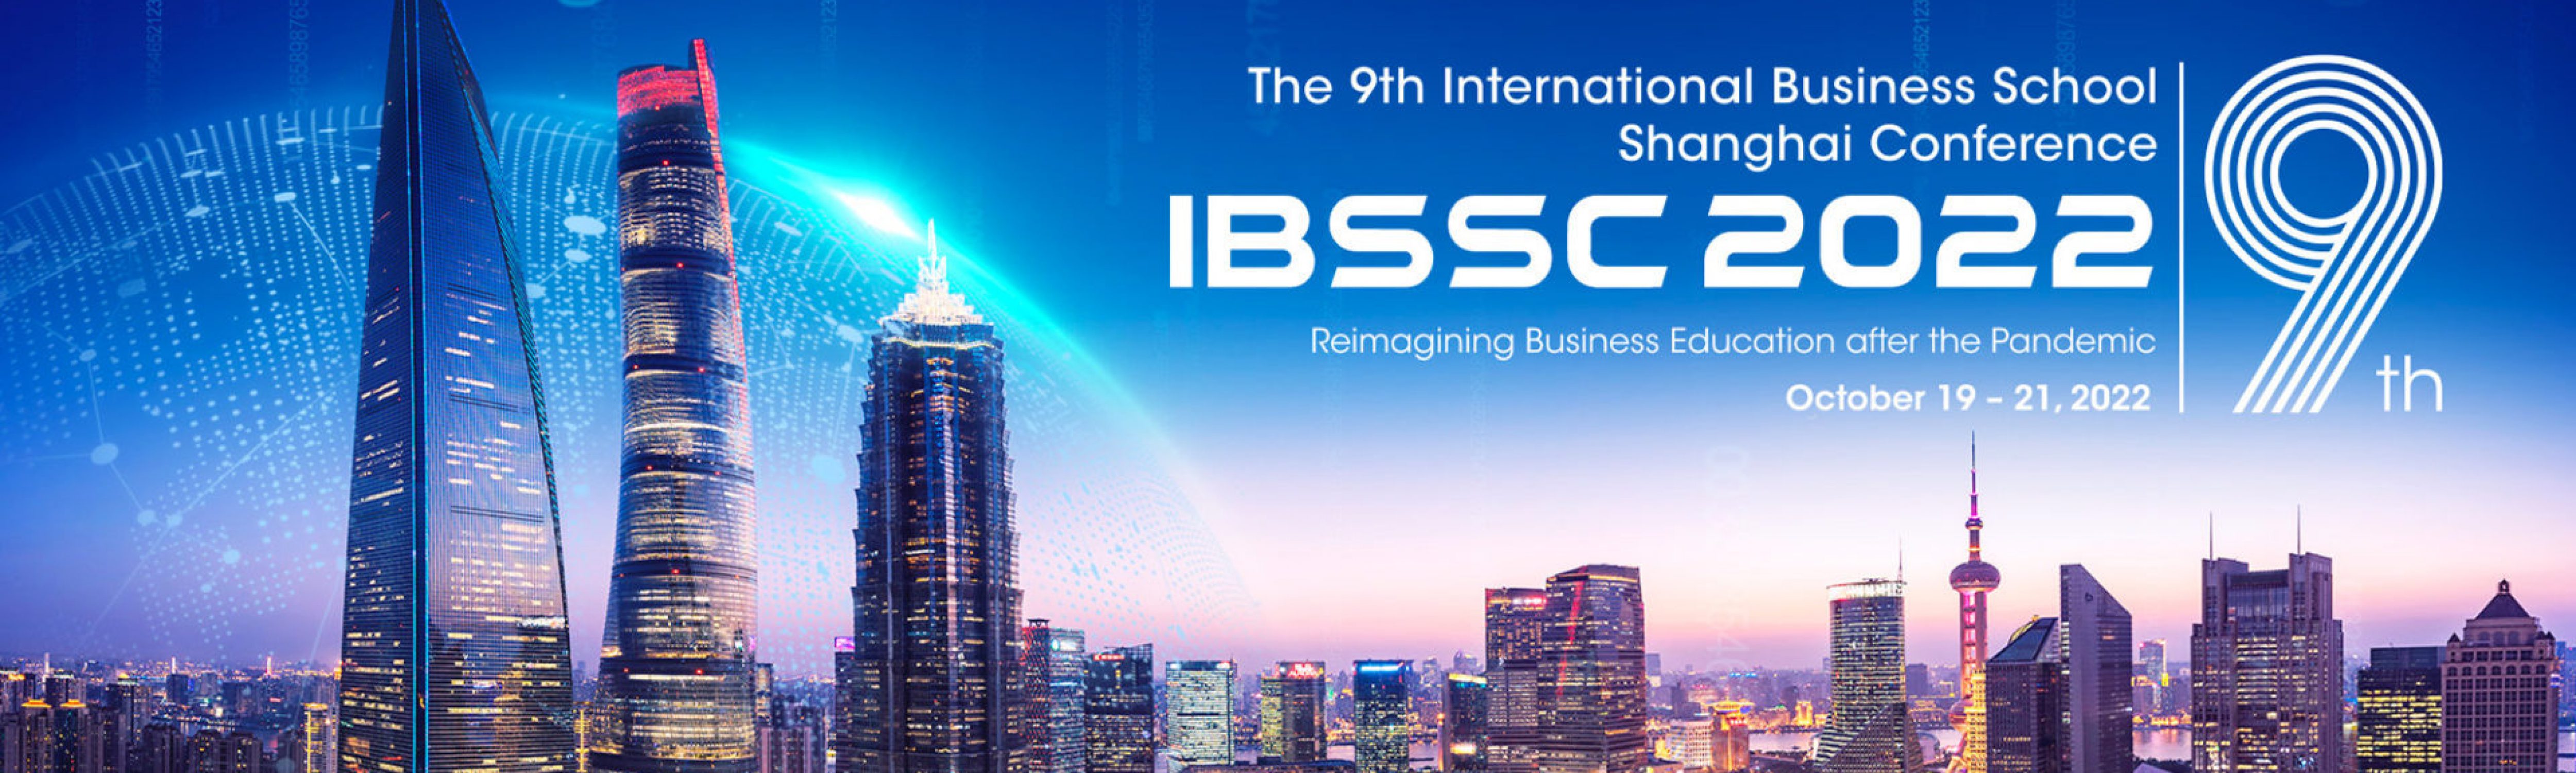 The 9th International Business School Shanghai Conference 2022